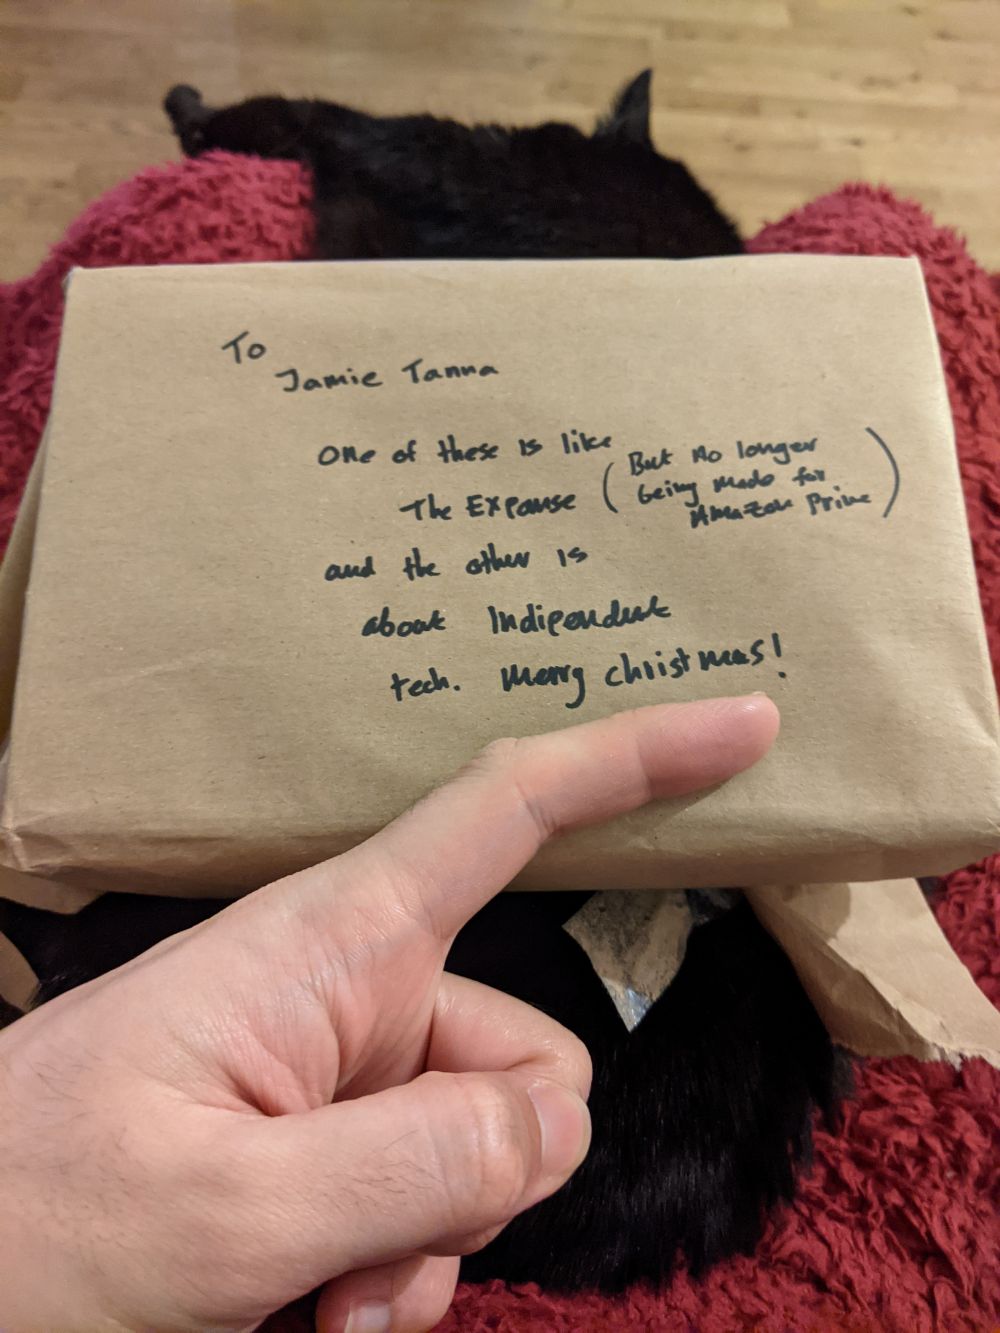 A parcel lying on top of a black cat, stretched out on a red blanket, addressed to Jamie, with the writing "One of these is like The Expanse (But no longer being made for Amazon Prime) and the other is about Independent tech. Merry Christmas!" with Jamie's finger resting over the Secret Santa's name